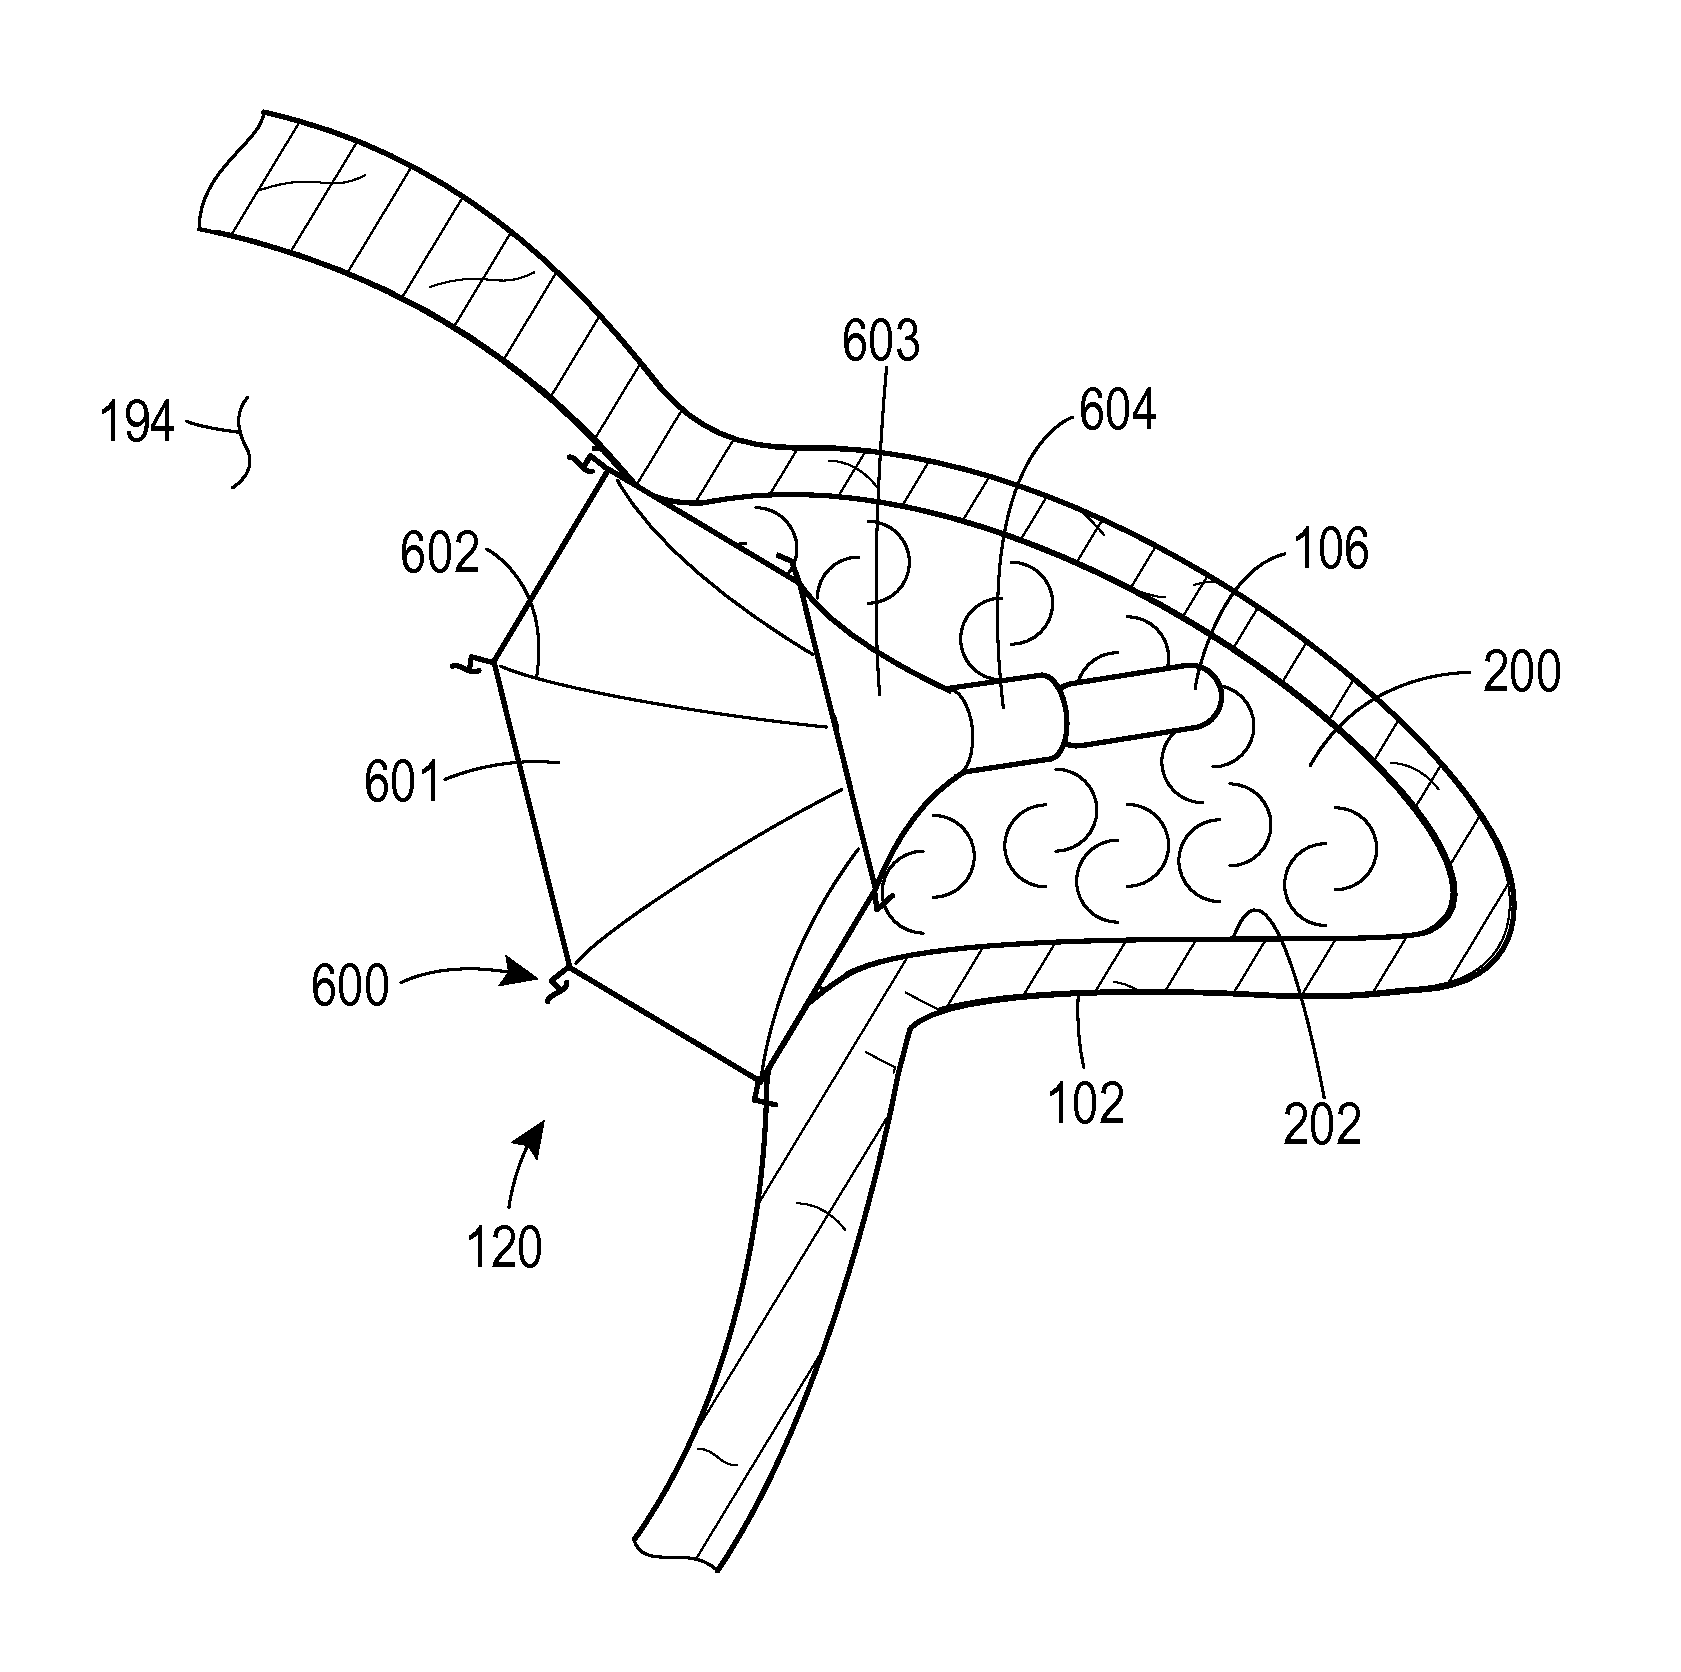 Multimodality left atrial appendage occlusion device